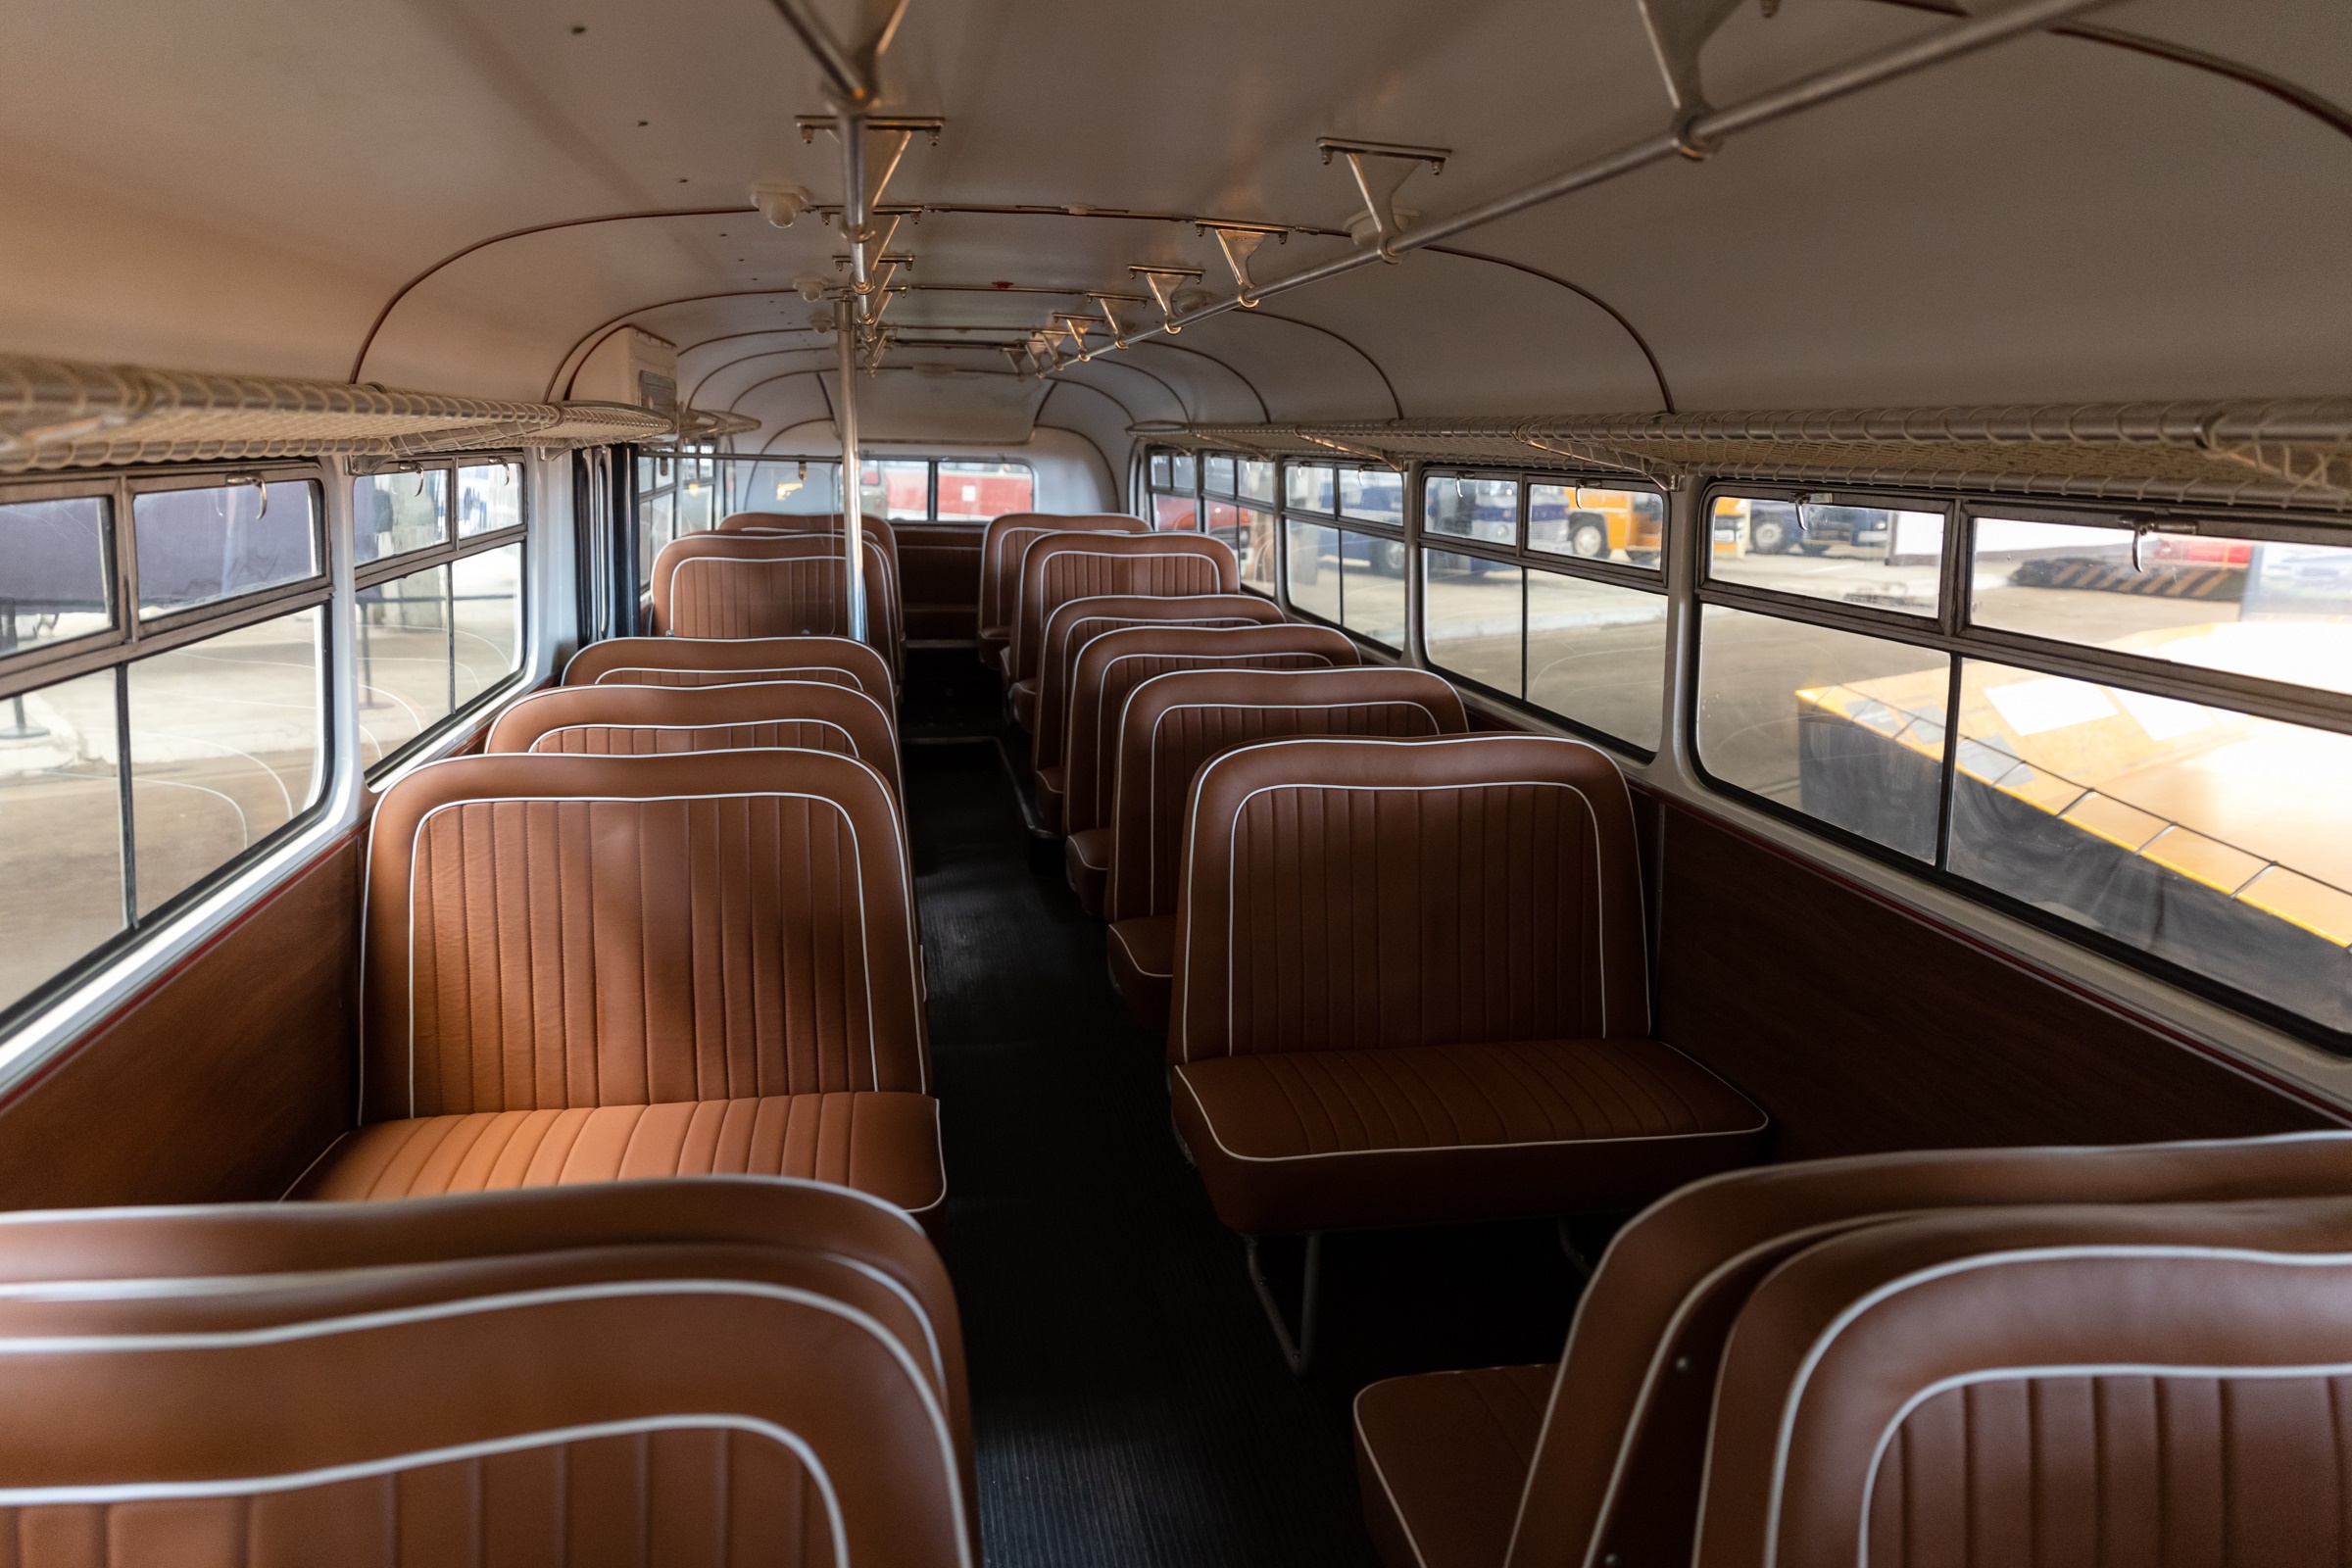 Magyar Bus: Ikarus rolls on for 120 years - English - WeloveBudapest